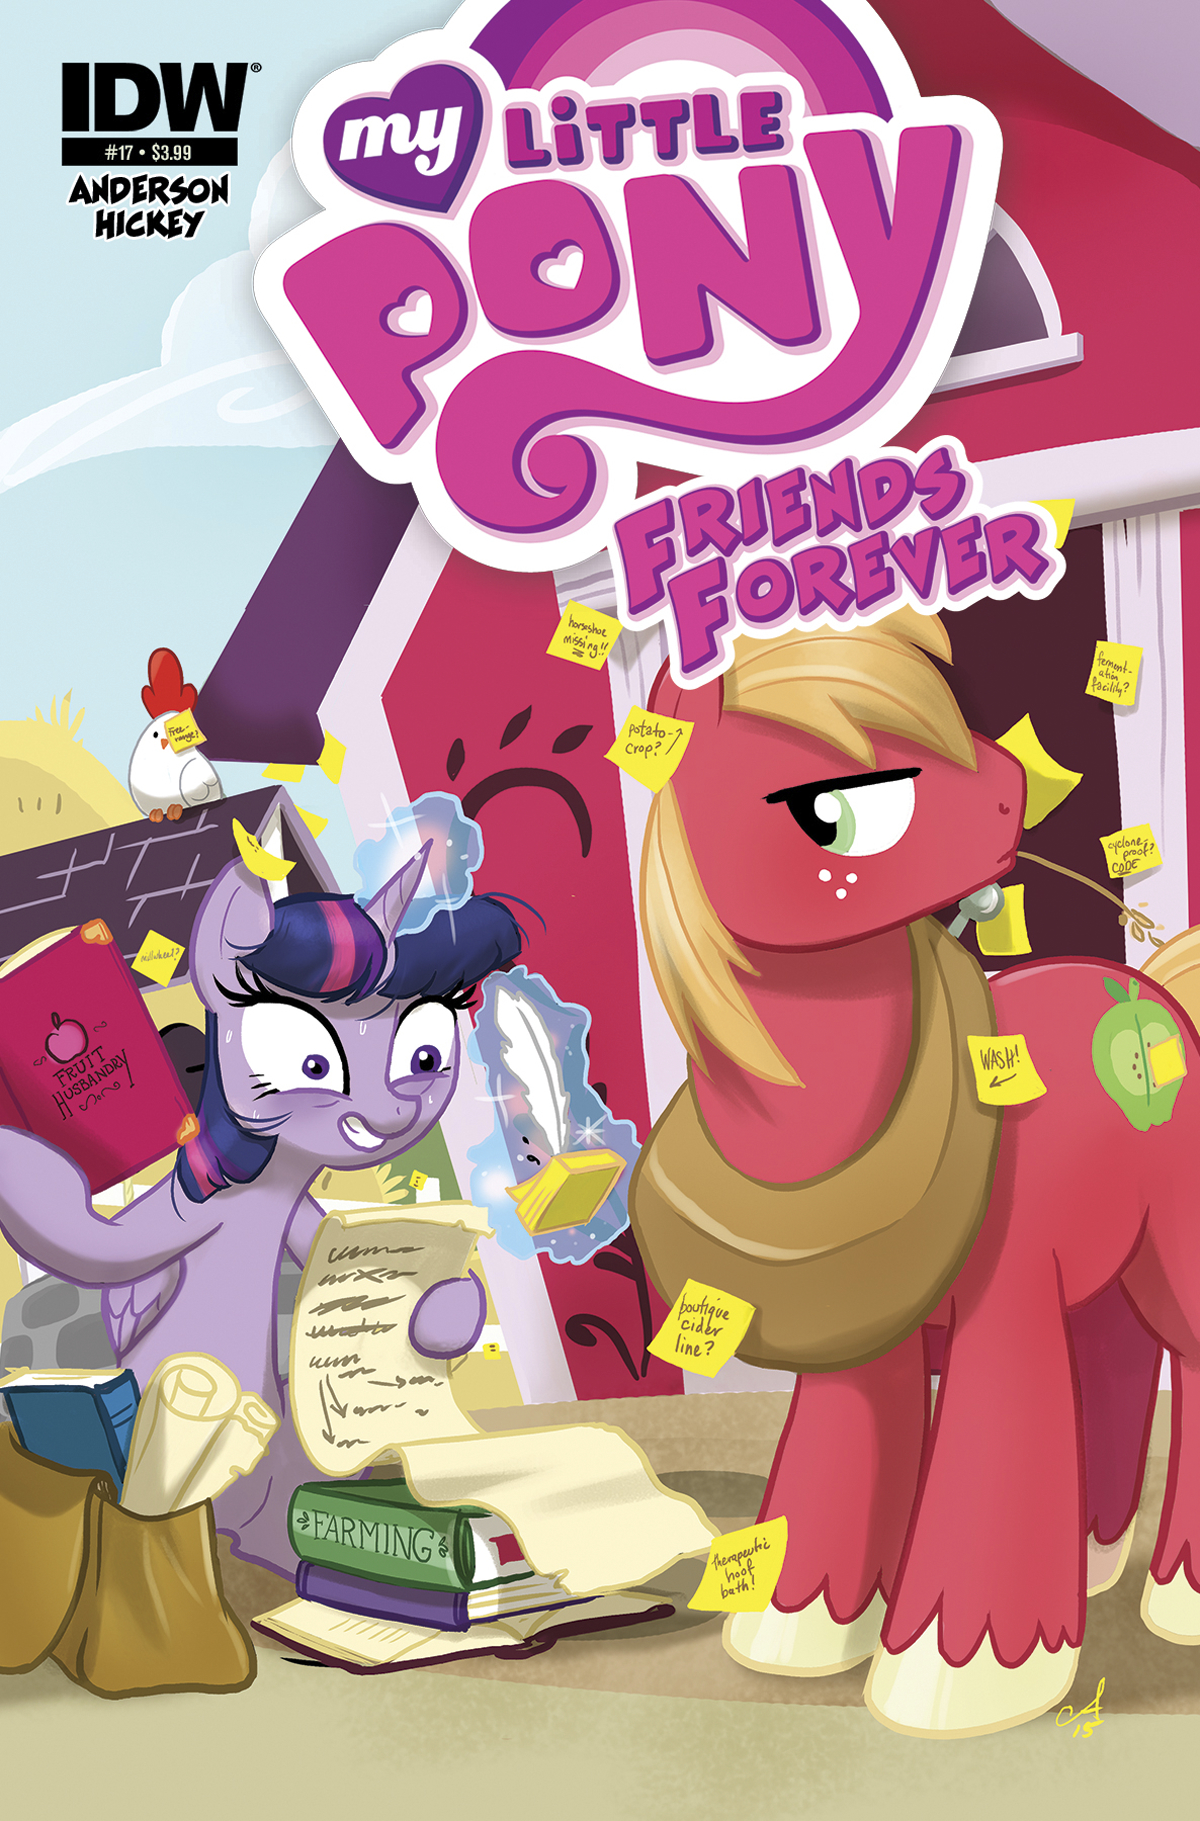 MY LITTLE PONY FRIENDS FOREVER #17